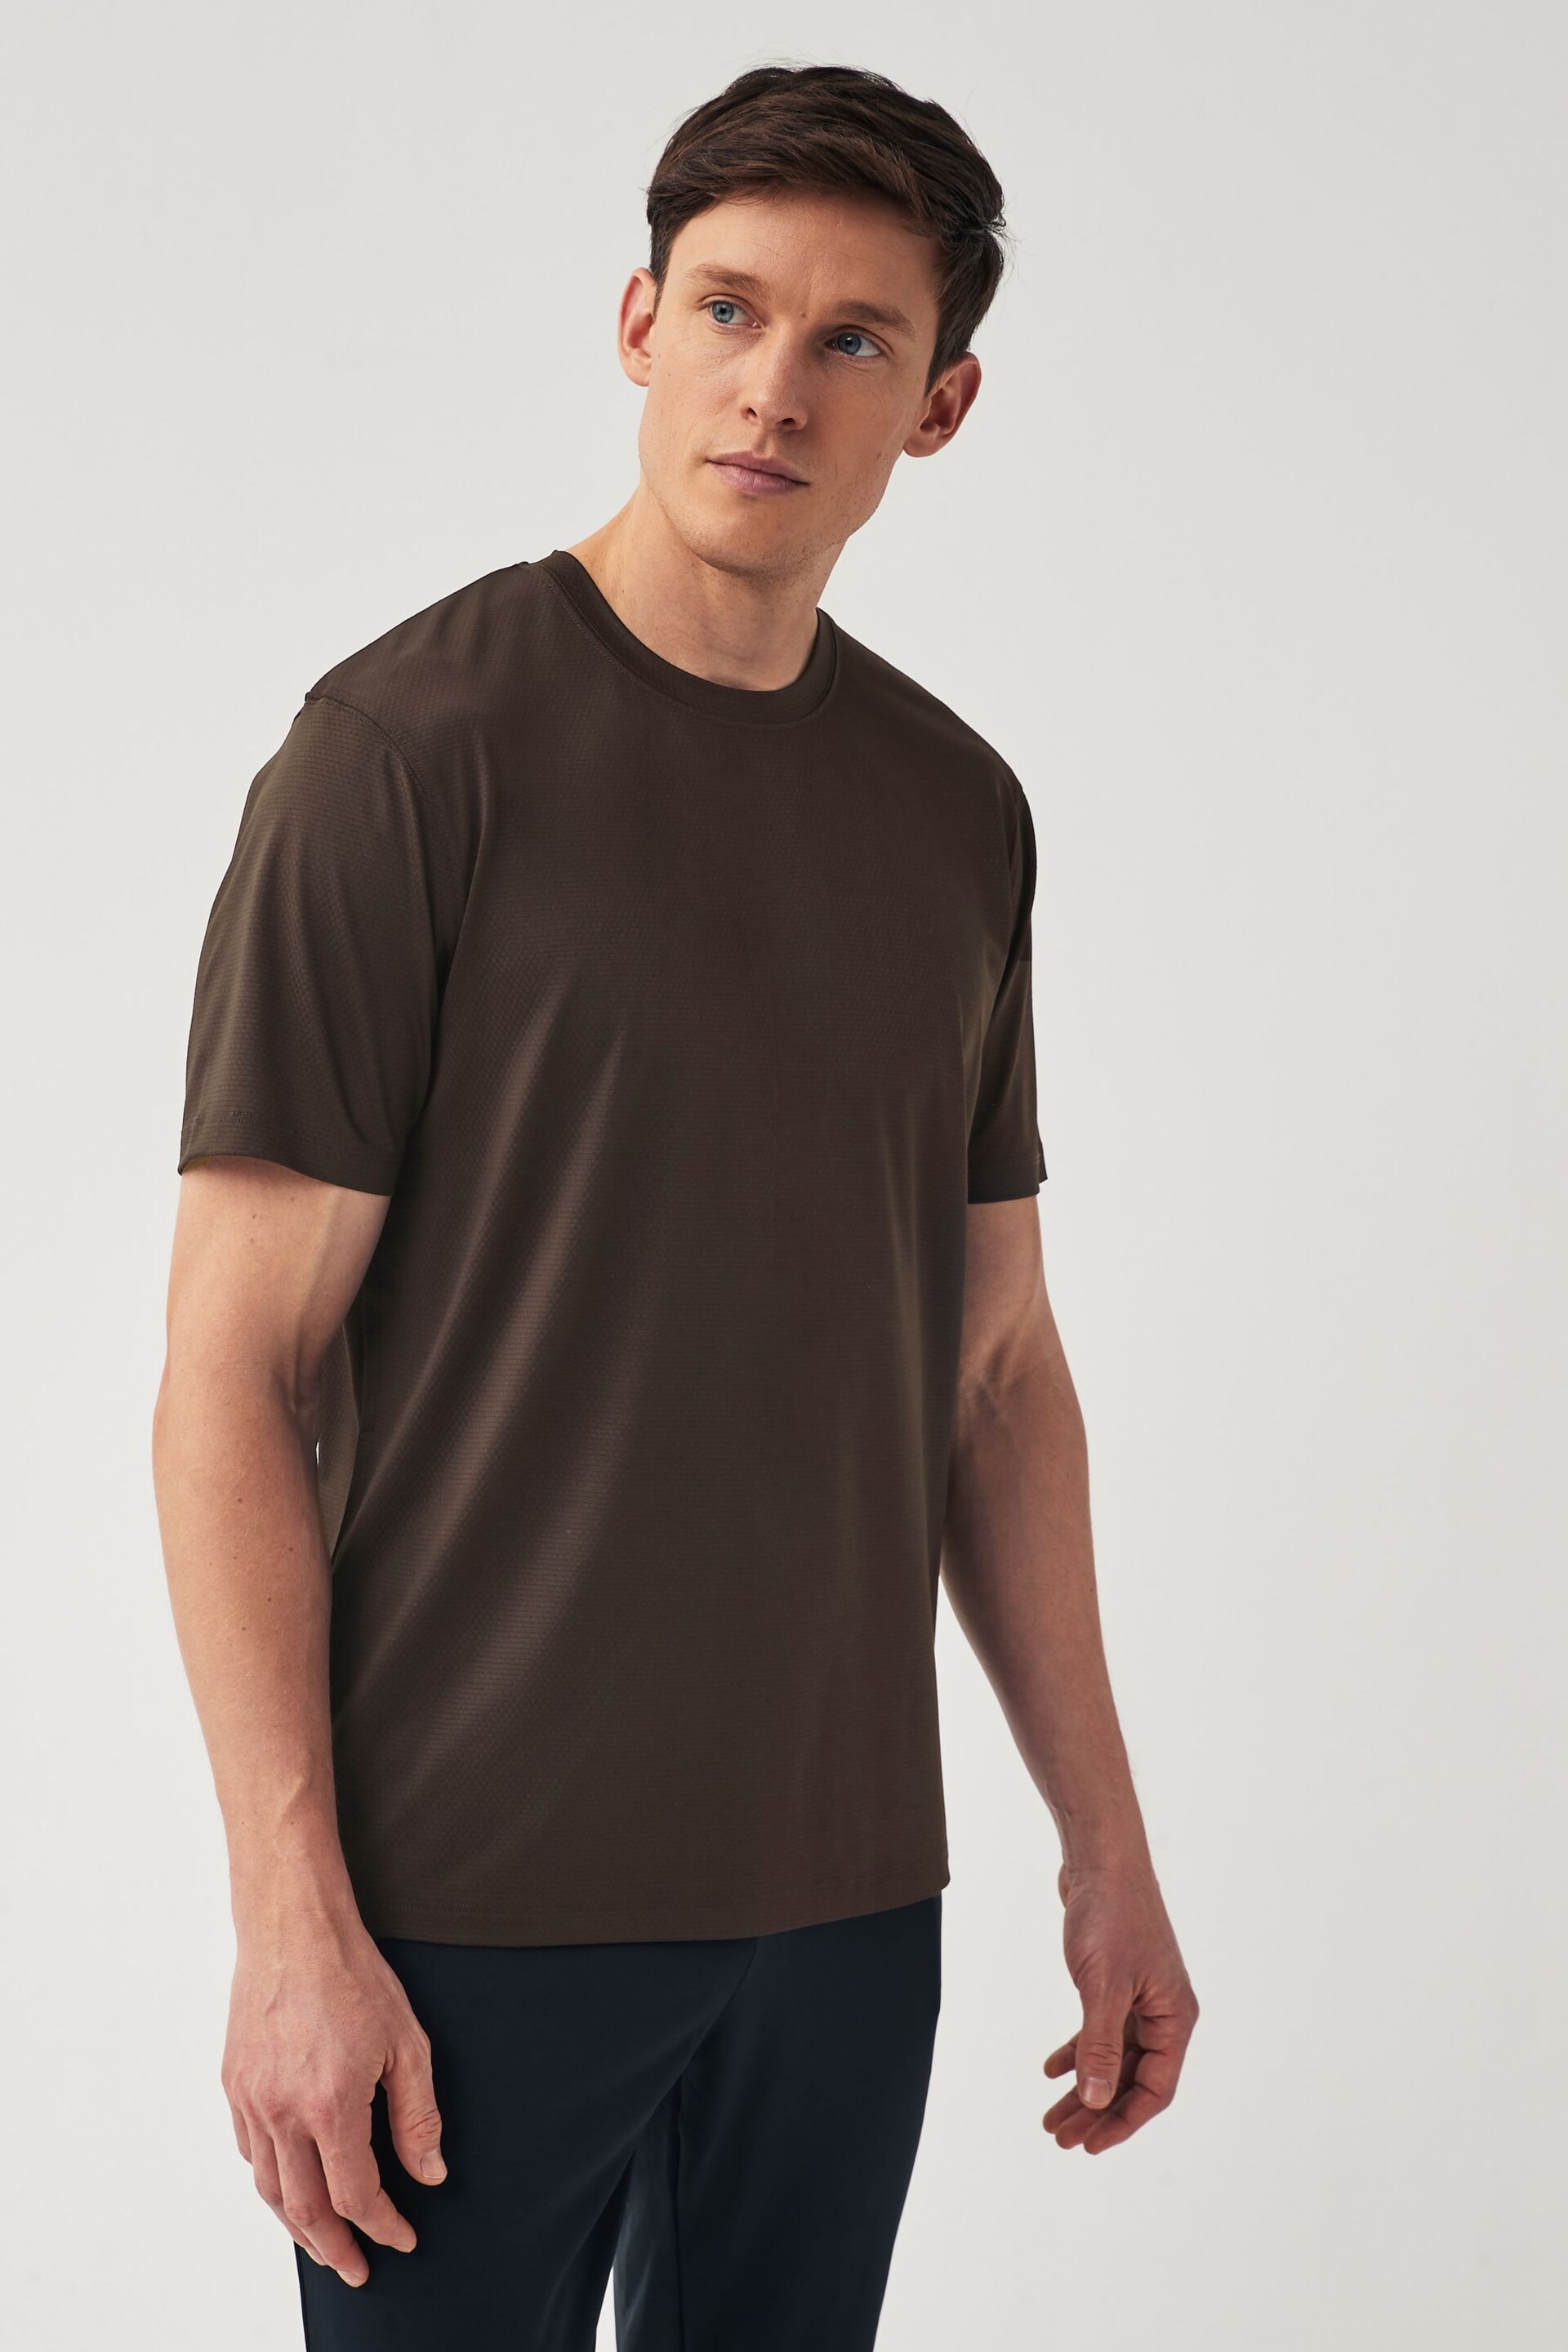 Chocolate Brown Active Gym and Training Textured T-Shirt - Image 2 of 8